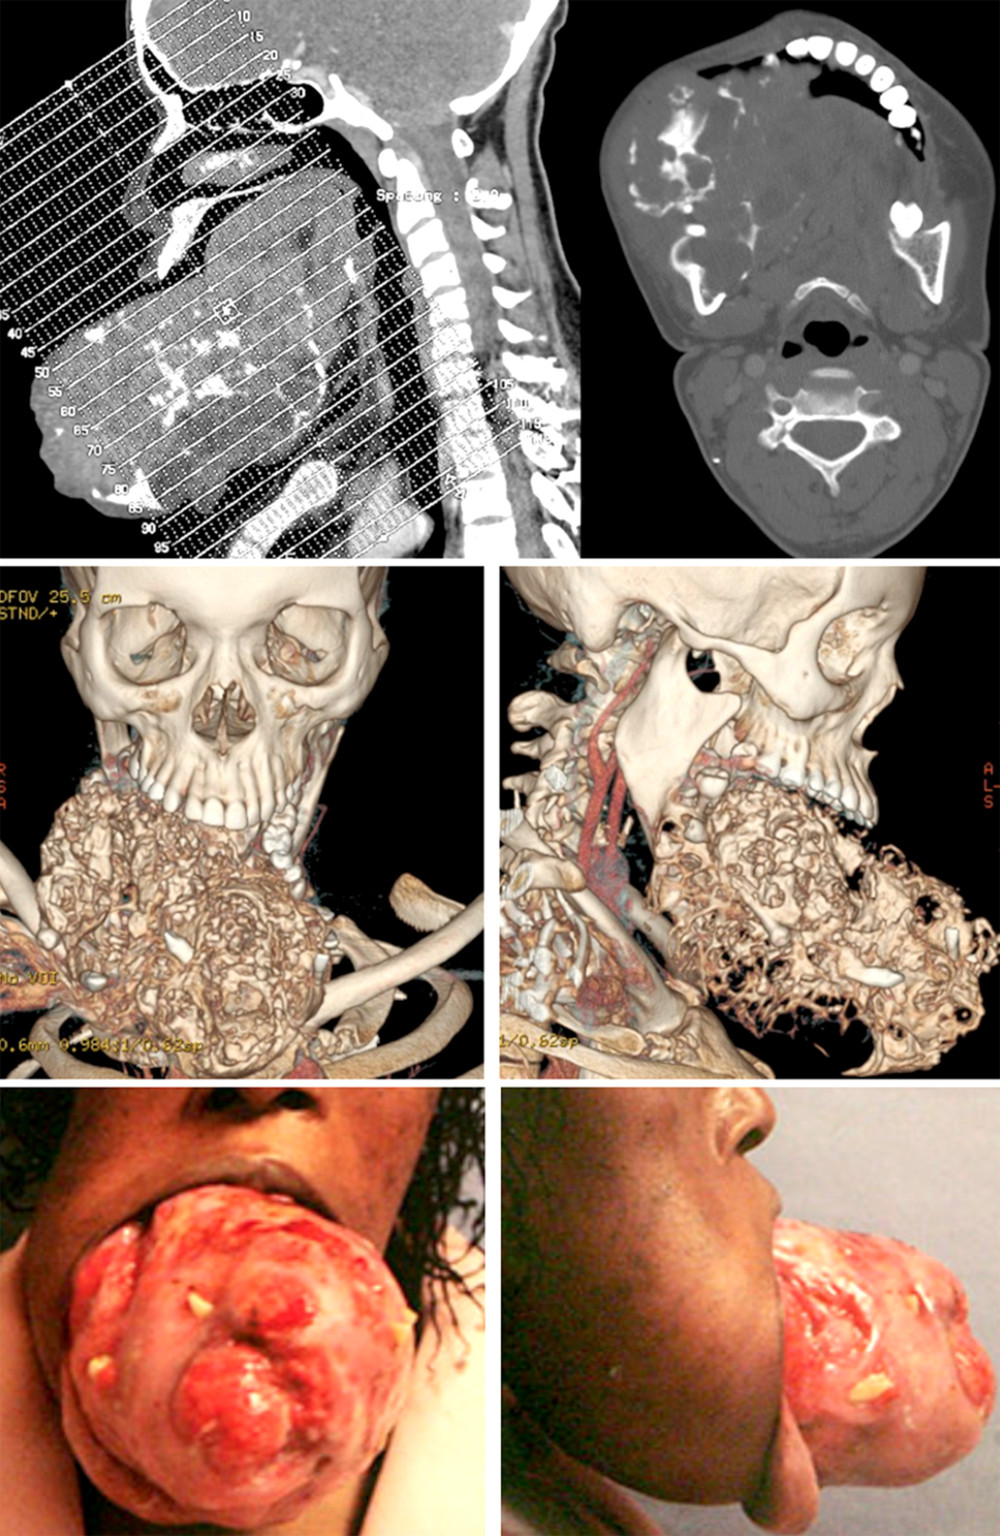 Computed tomography imaging of primary ameloblastoma with measurement and 3-dimensional reconstruction.